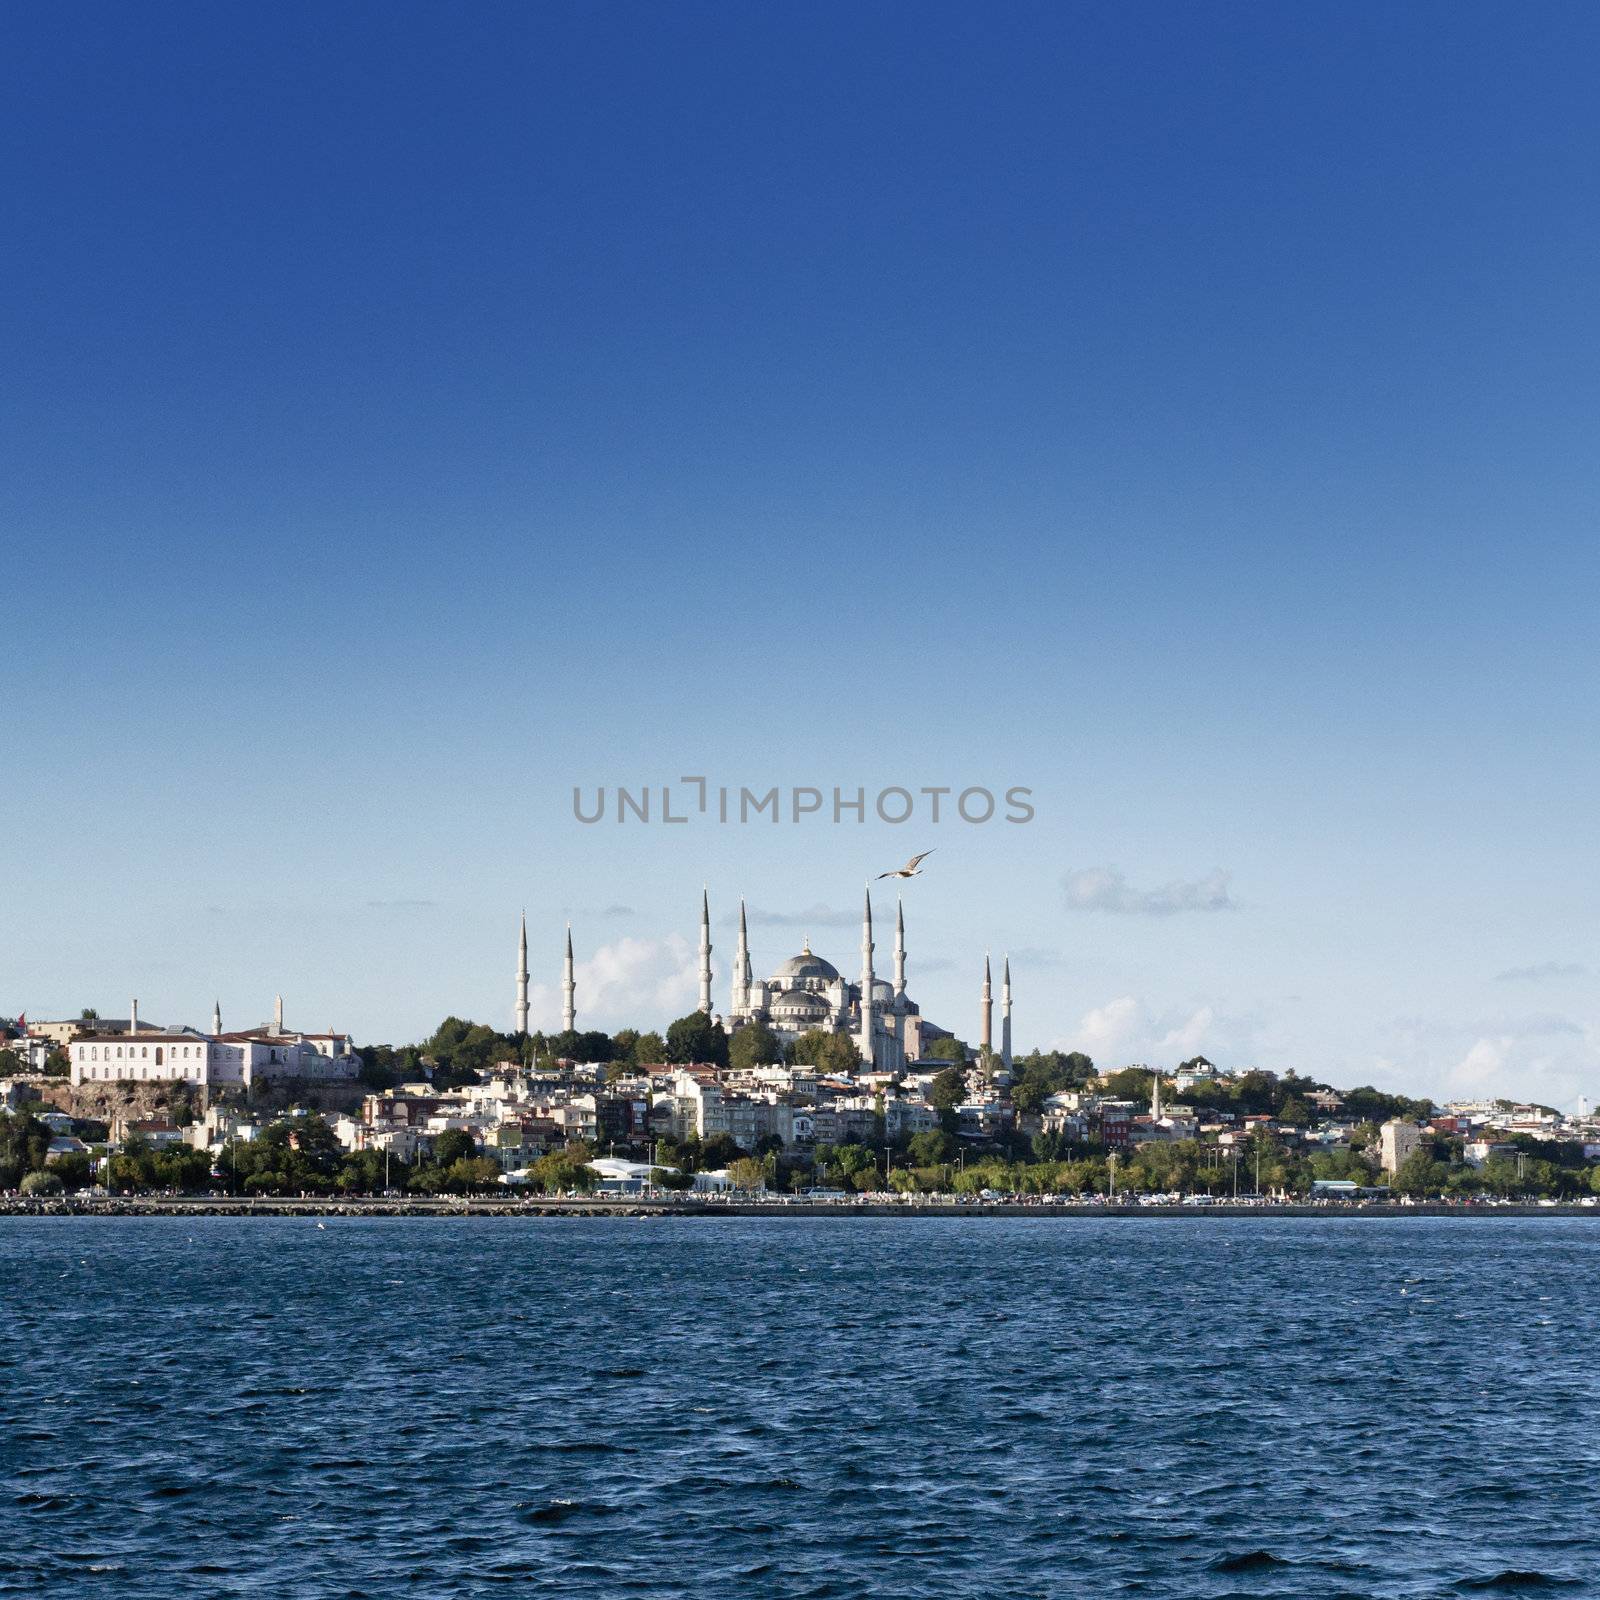 Sultanahmet (the Blue Mosque) under a blue sky and cloudscape in the background, taken from the sea